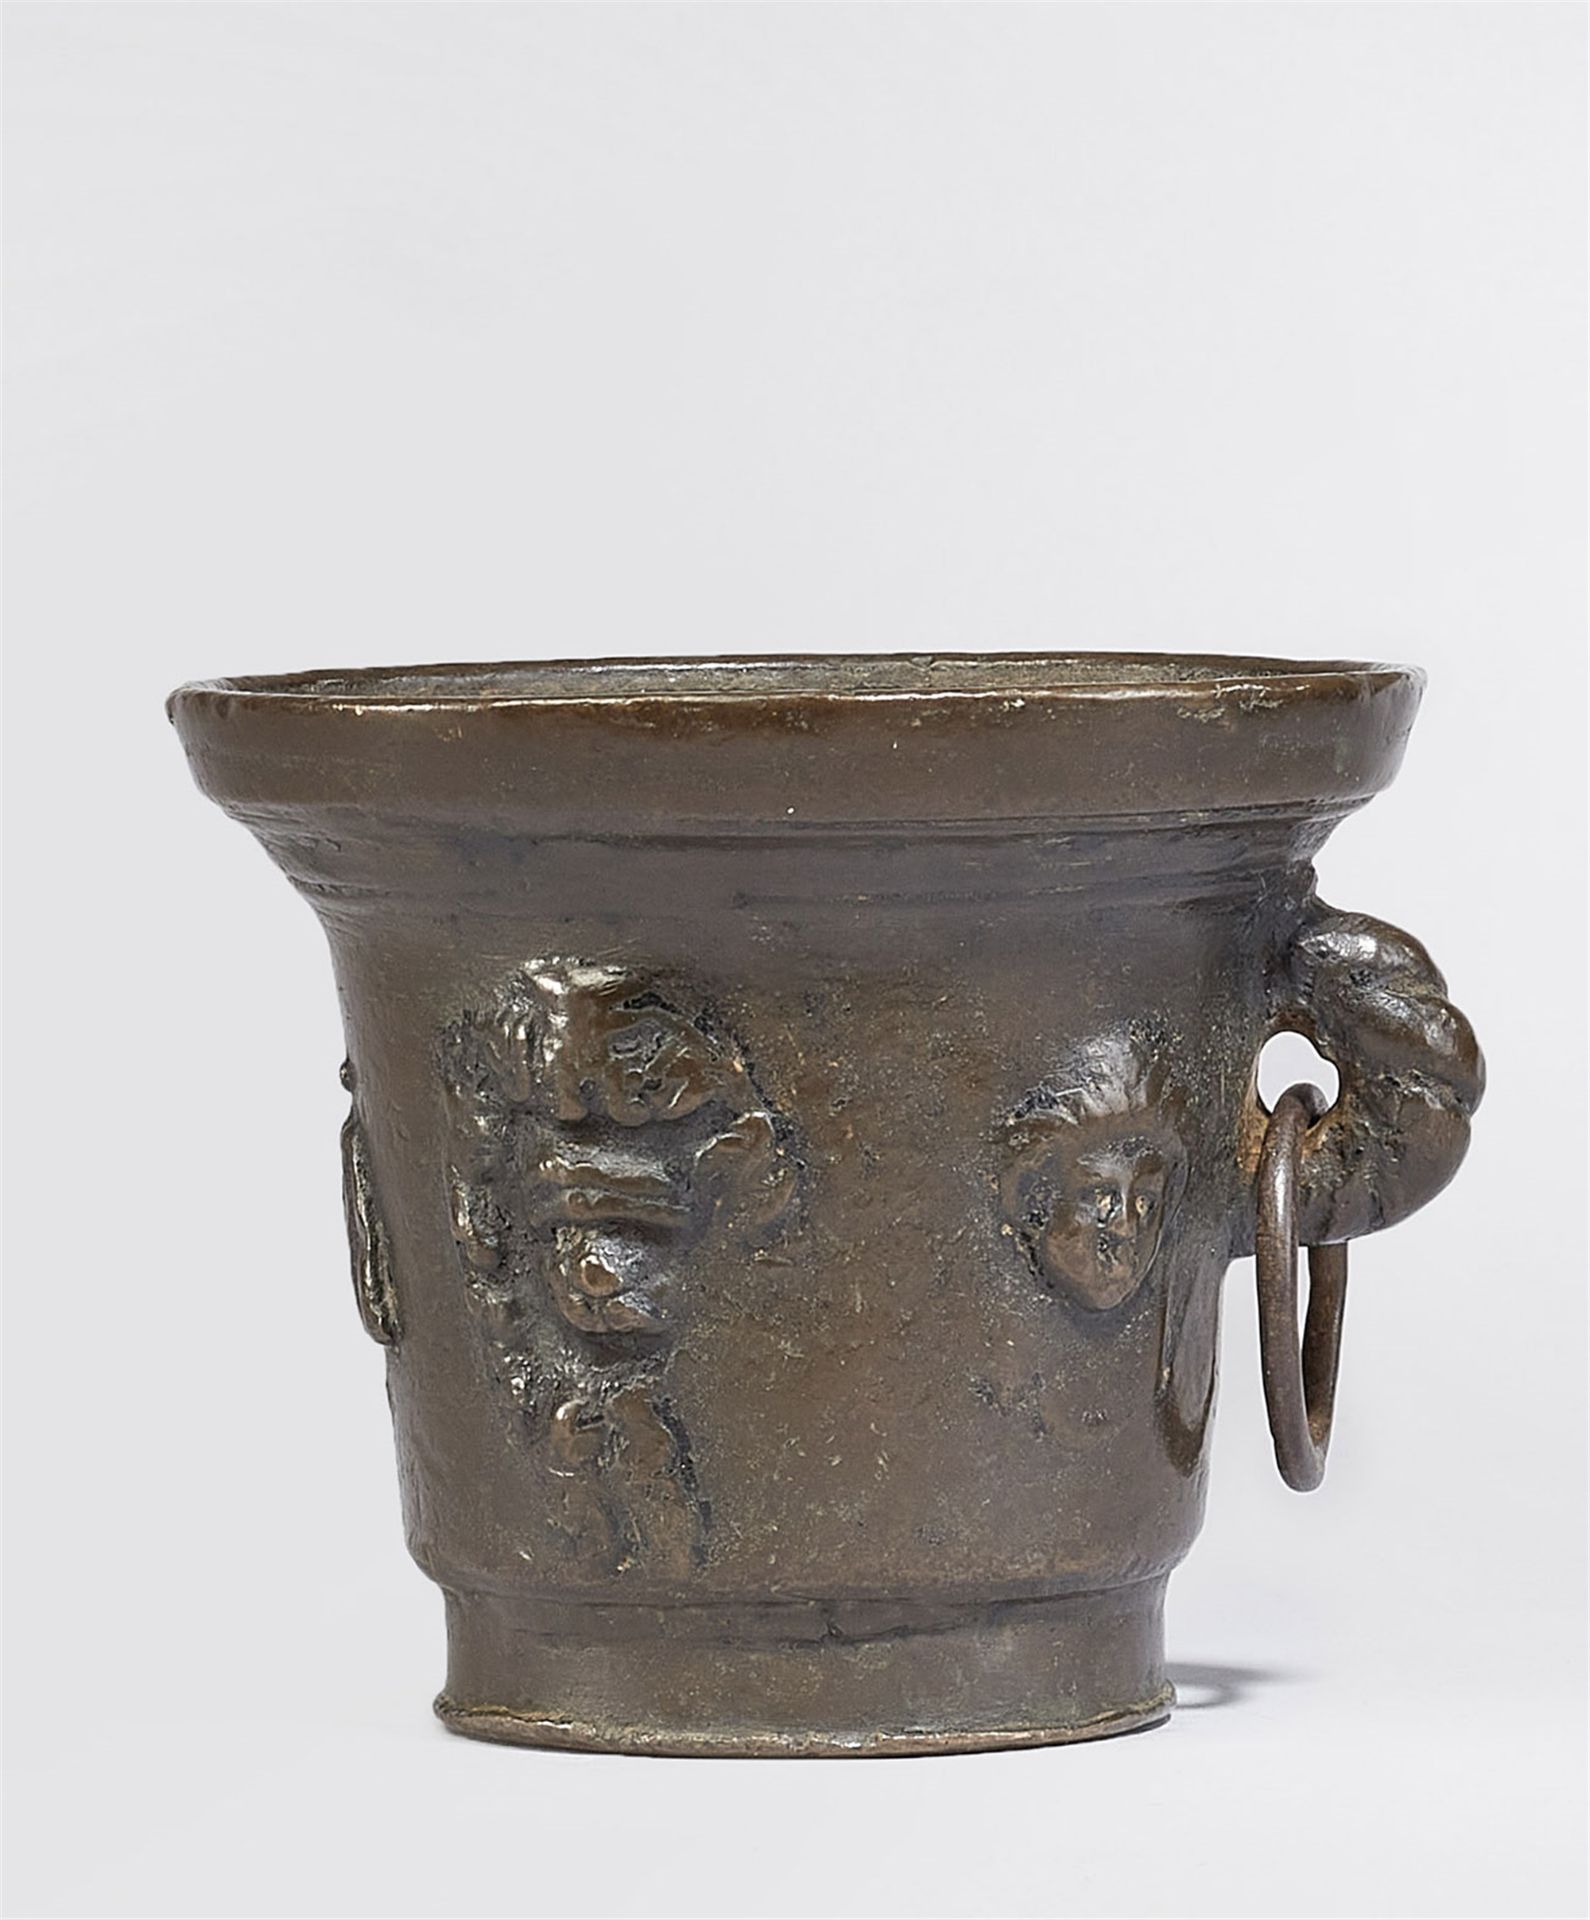 A Gothic single-handled mortar with mascarons